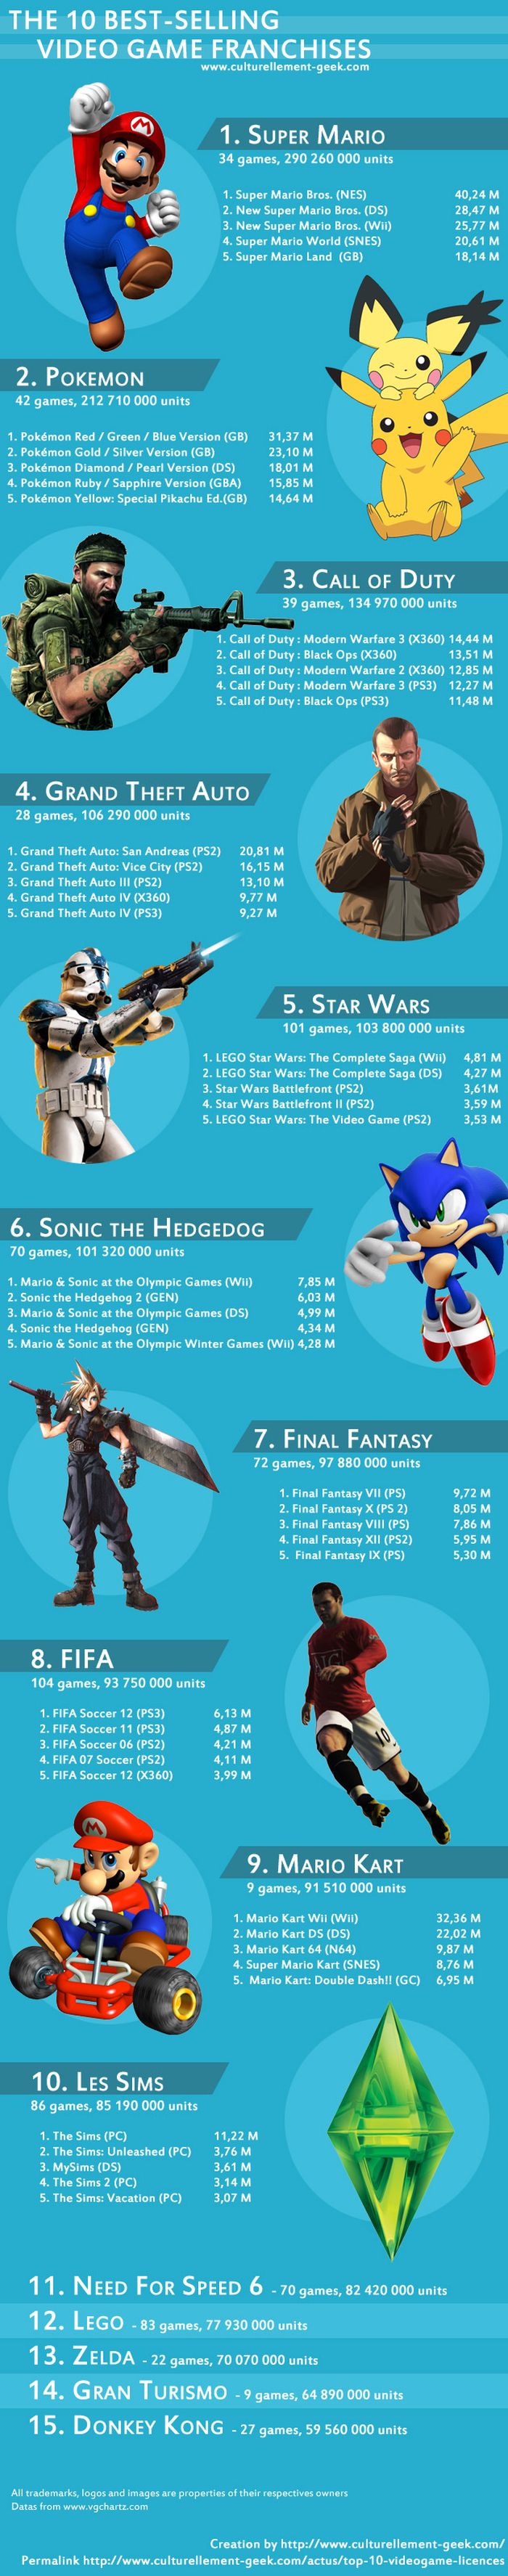 Best-Selling Video Games (1 pic)